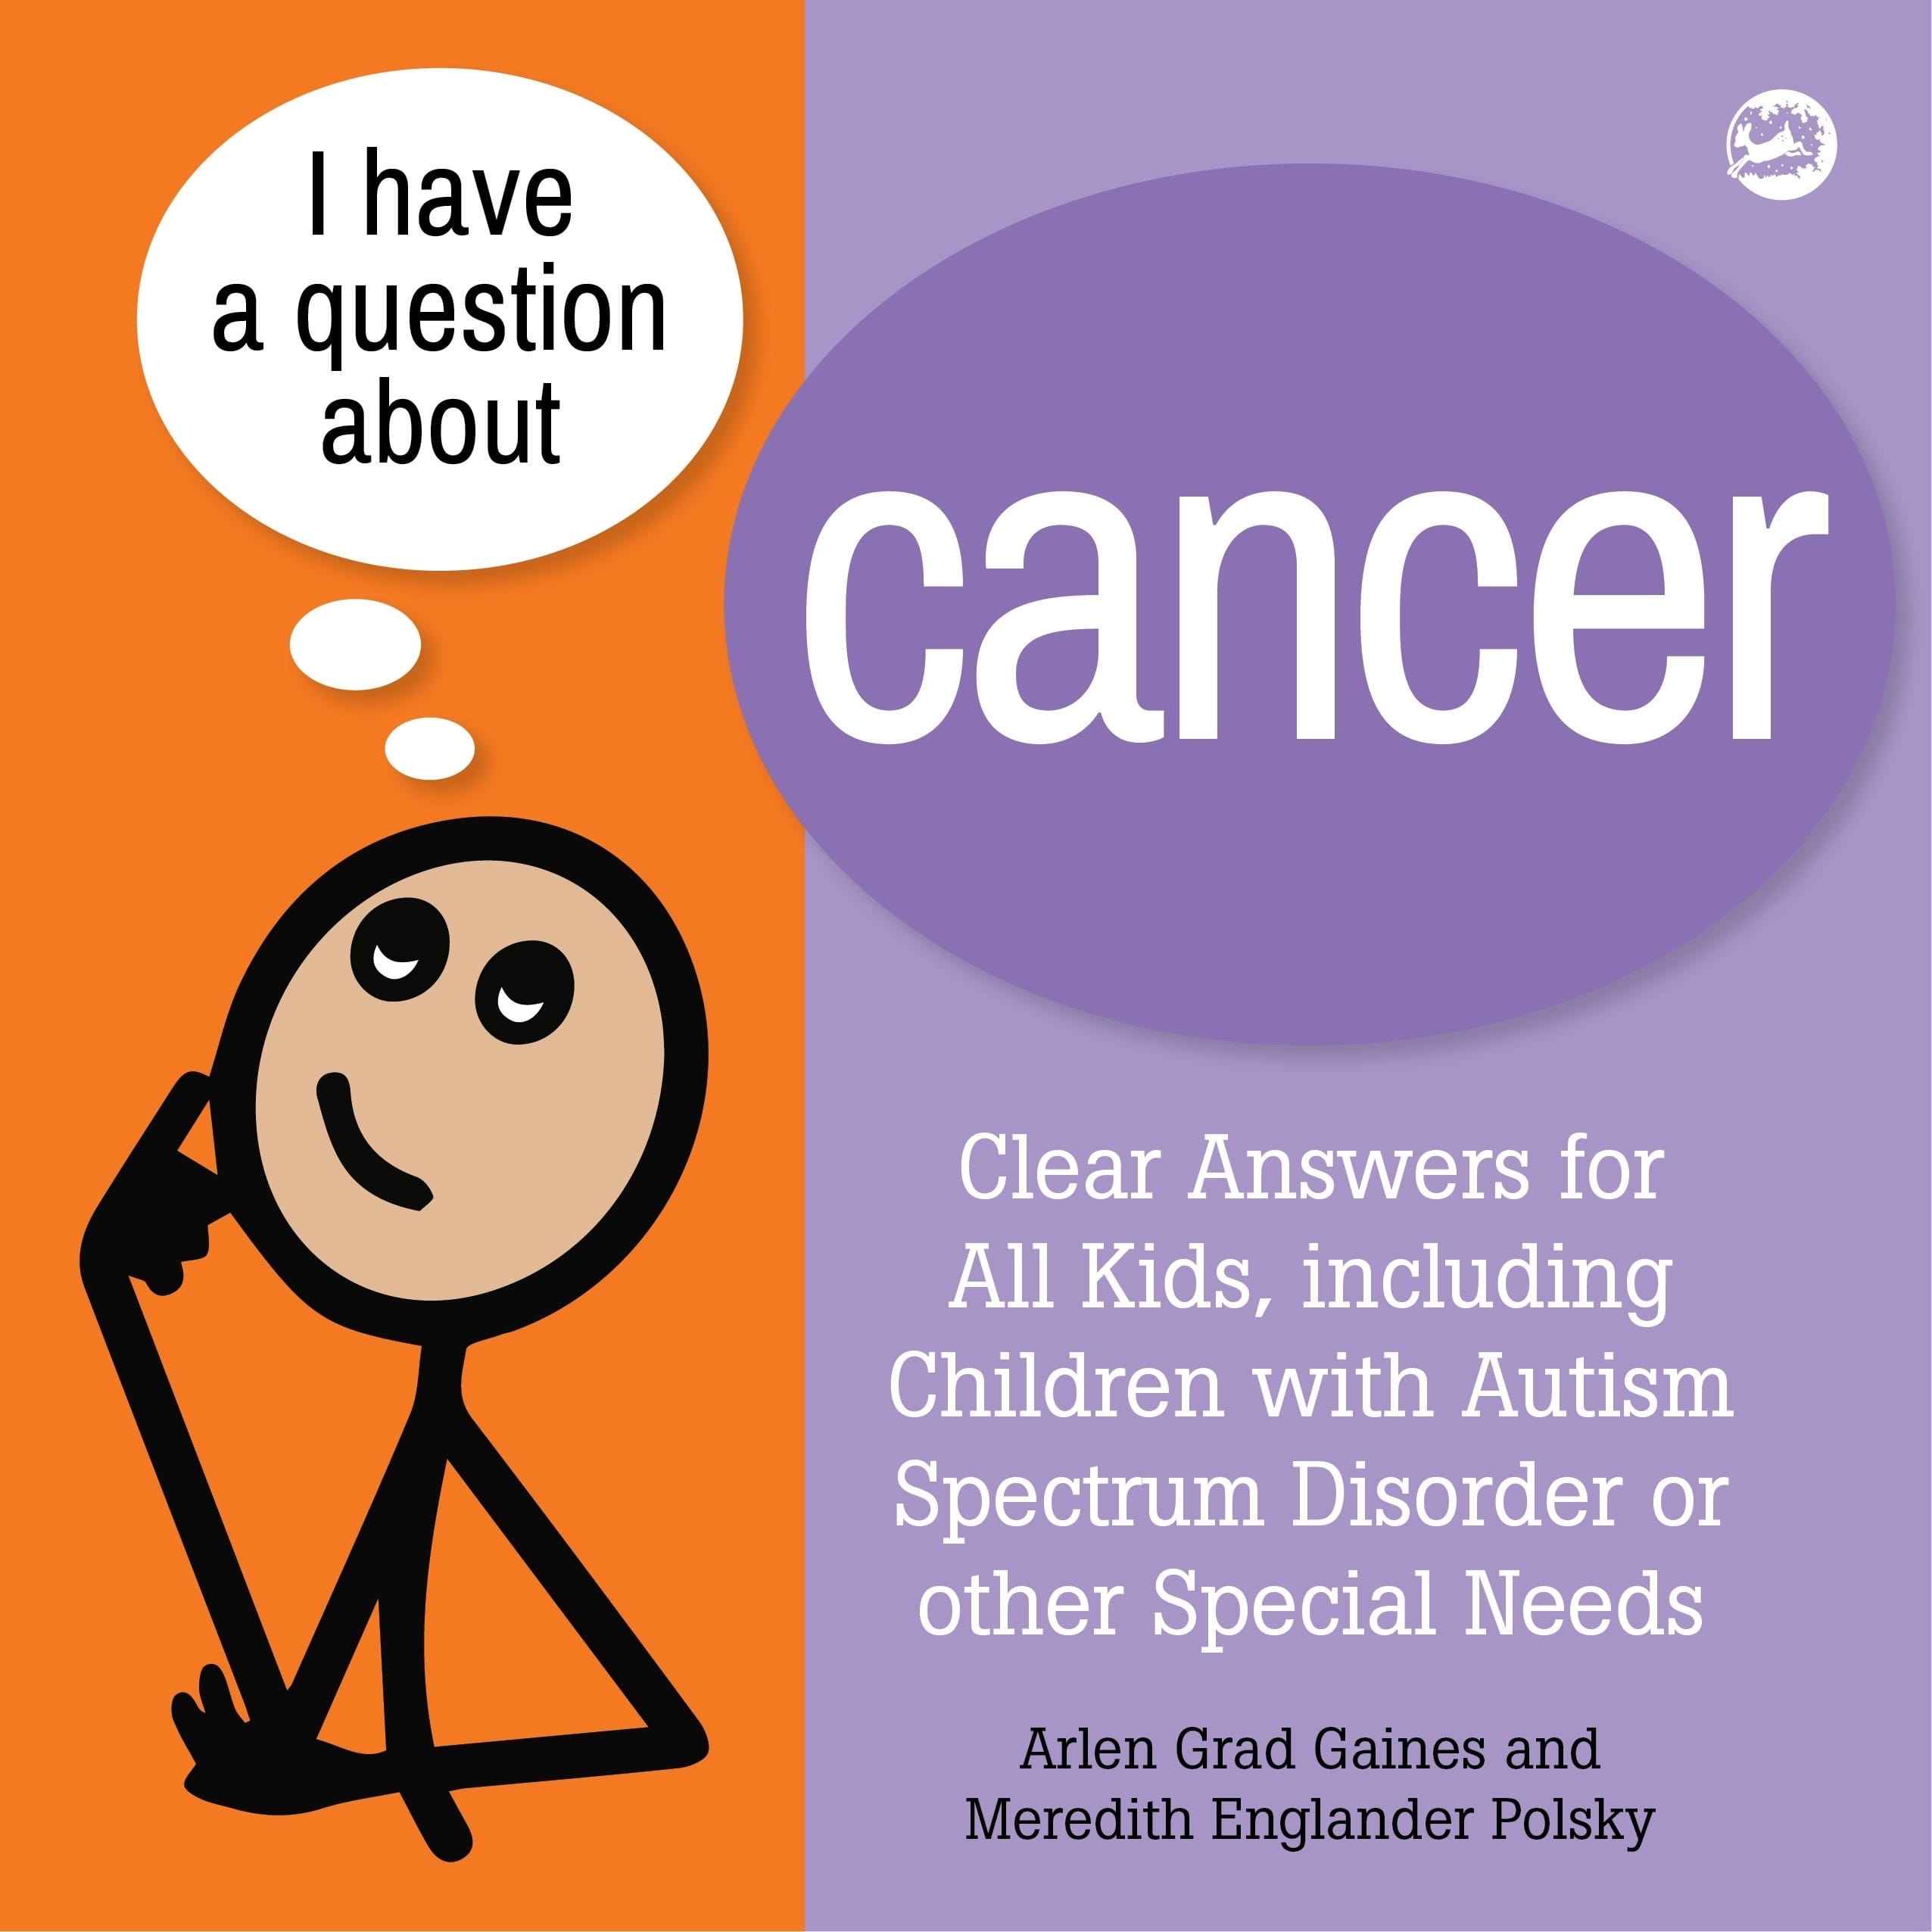 research questions about pediatric cancer